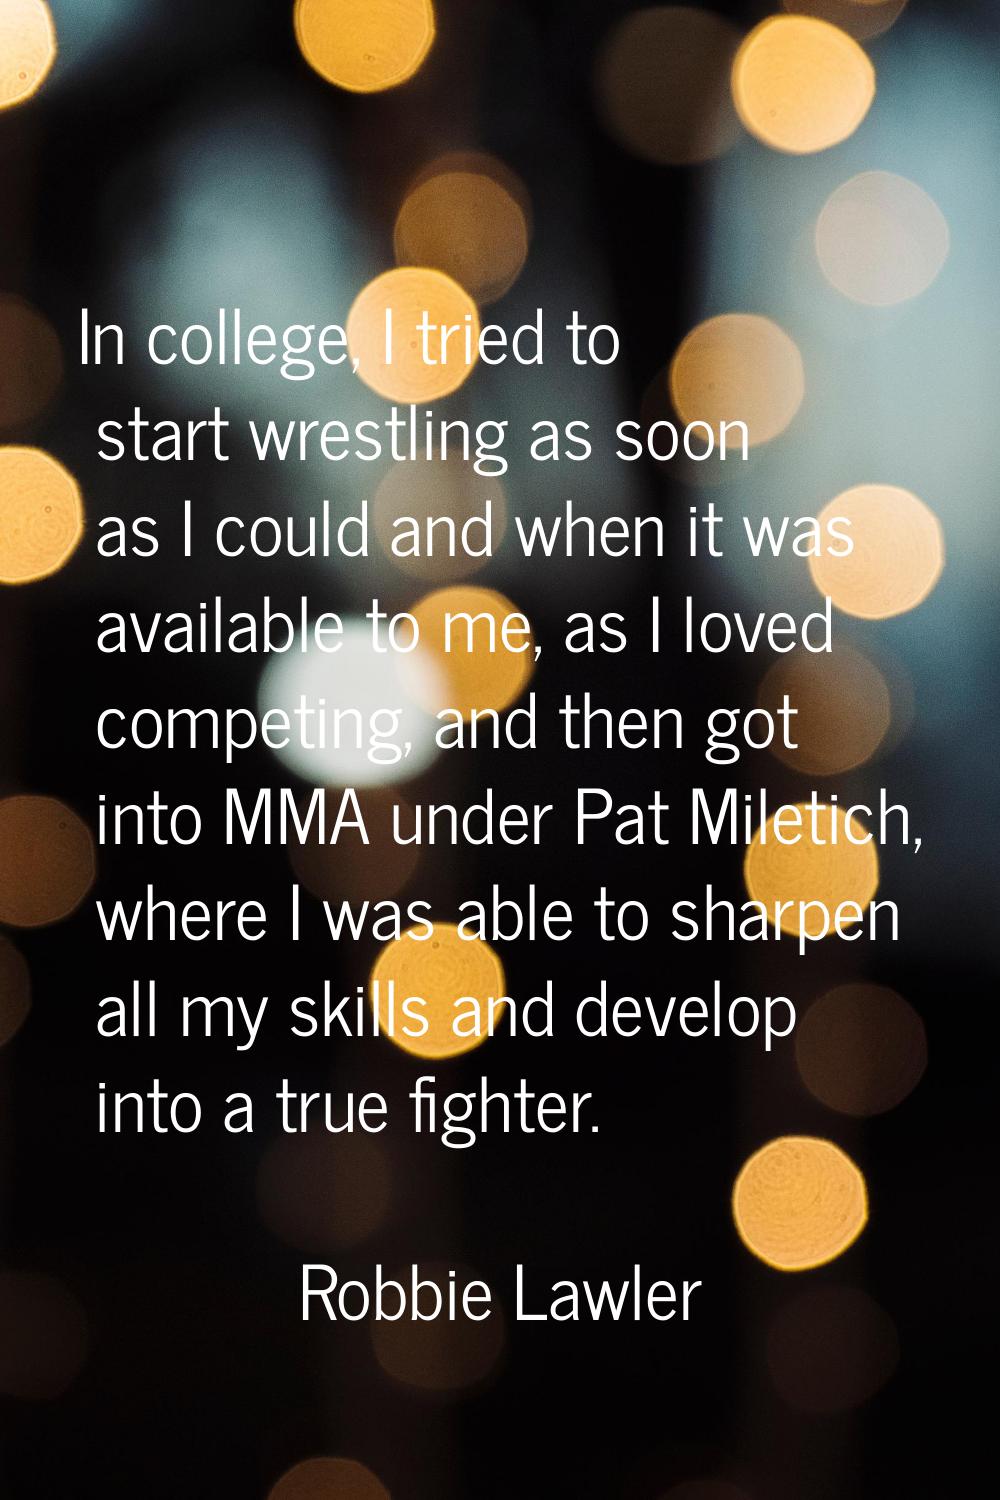 In college, I tried to start wrestling as soon as I could and when it was available to me, as I lov